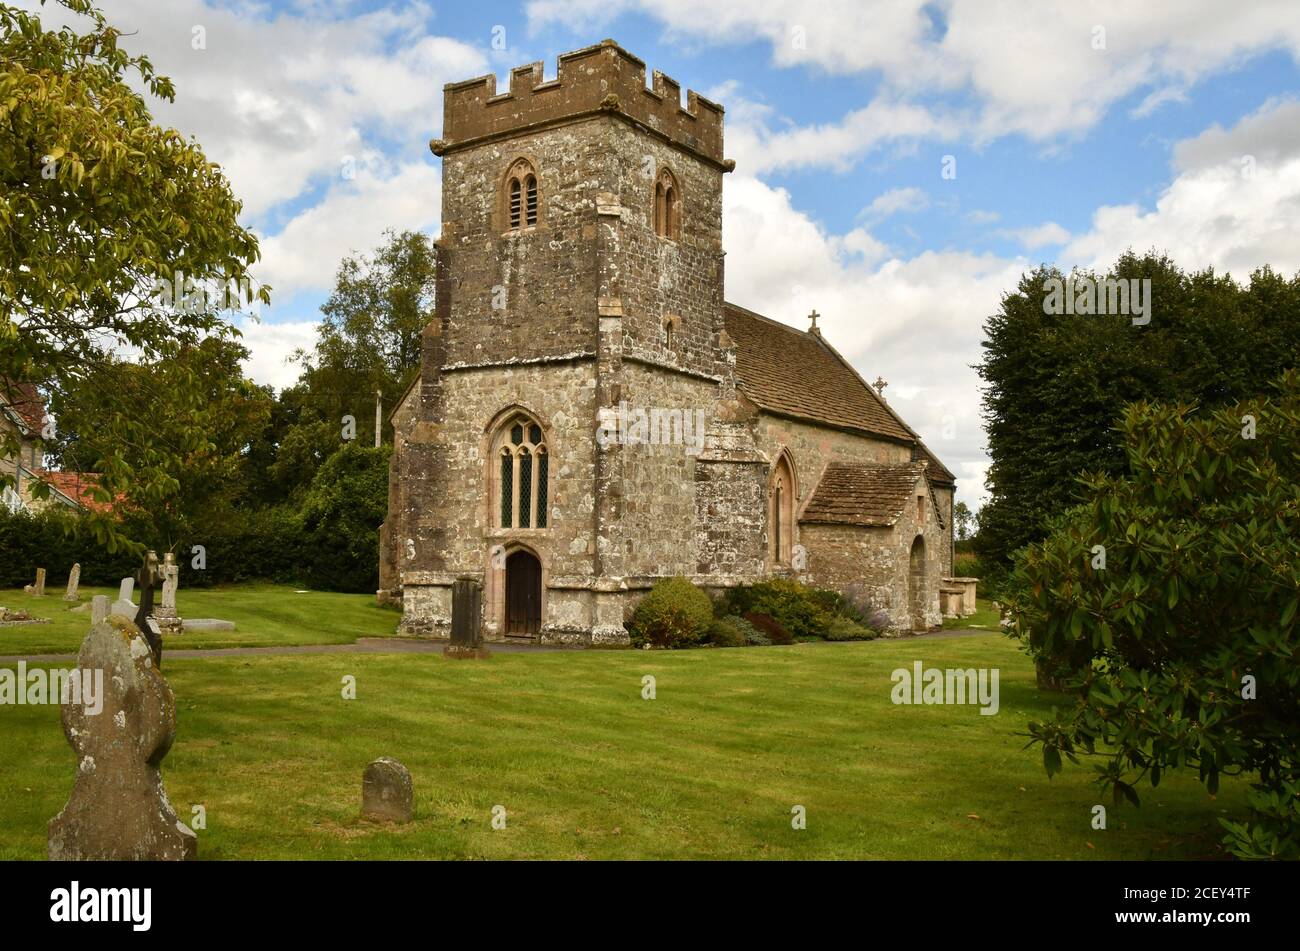 The Anglican Church of St Michael and All Angels in Penselwood, Somerset, England.  Grade 2 listed was built in the 15th century. Stock Photo